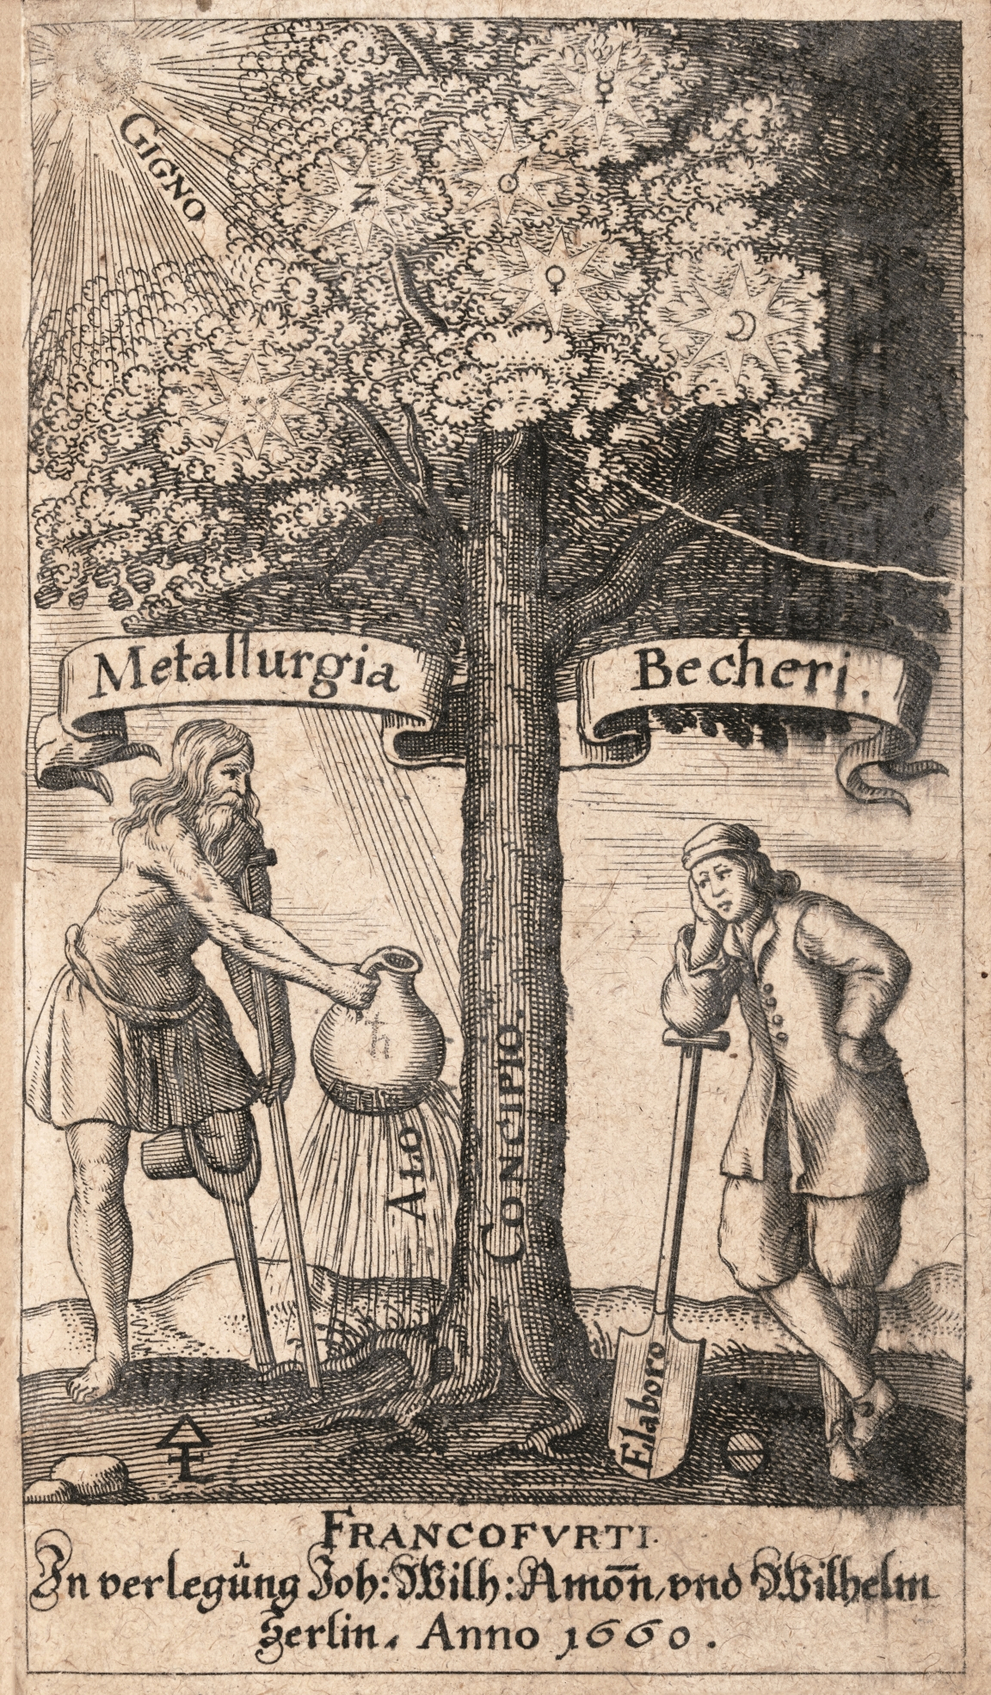 The miner and a one-legged man stand at the allegorical tree of alchemy.